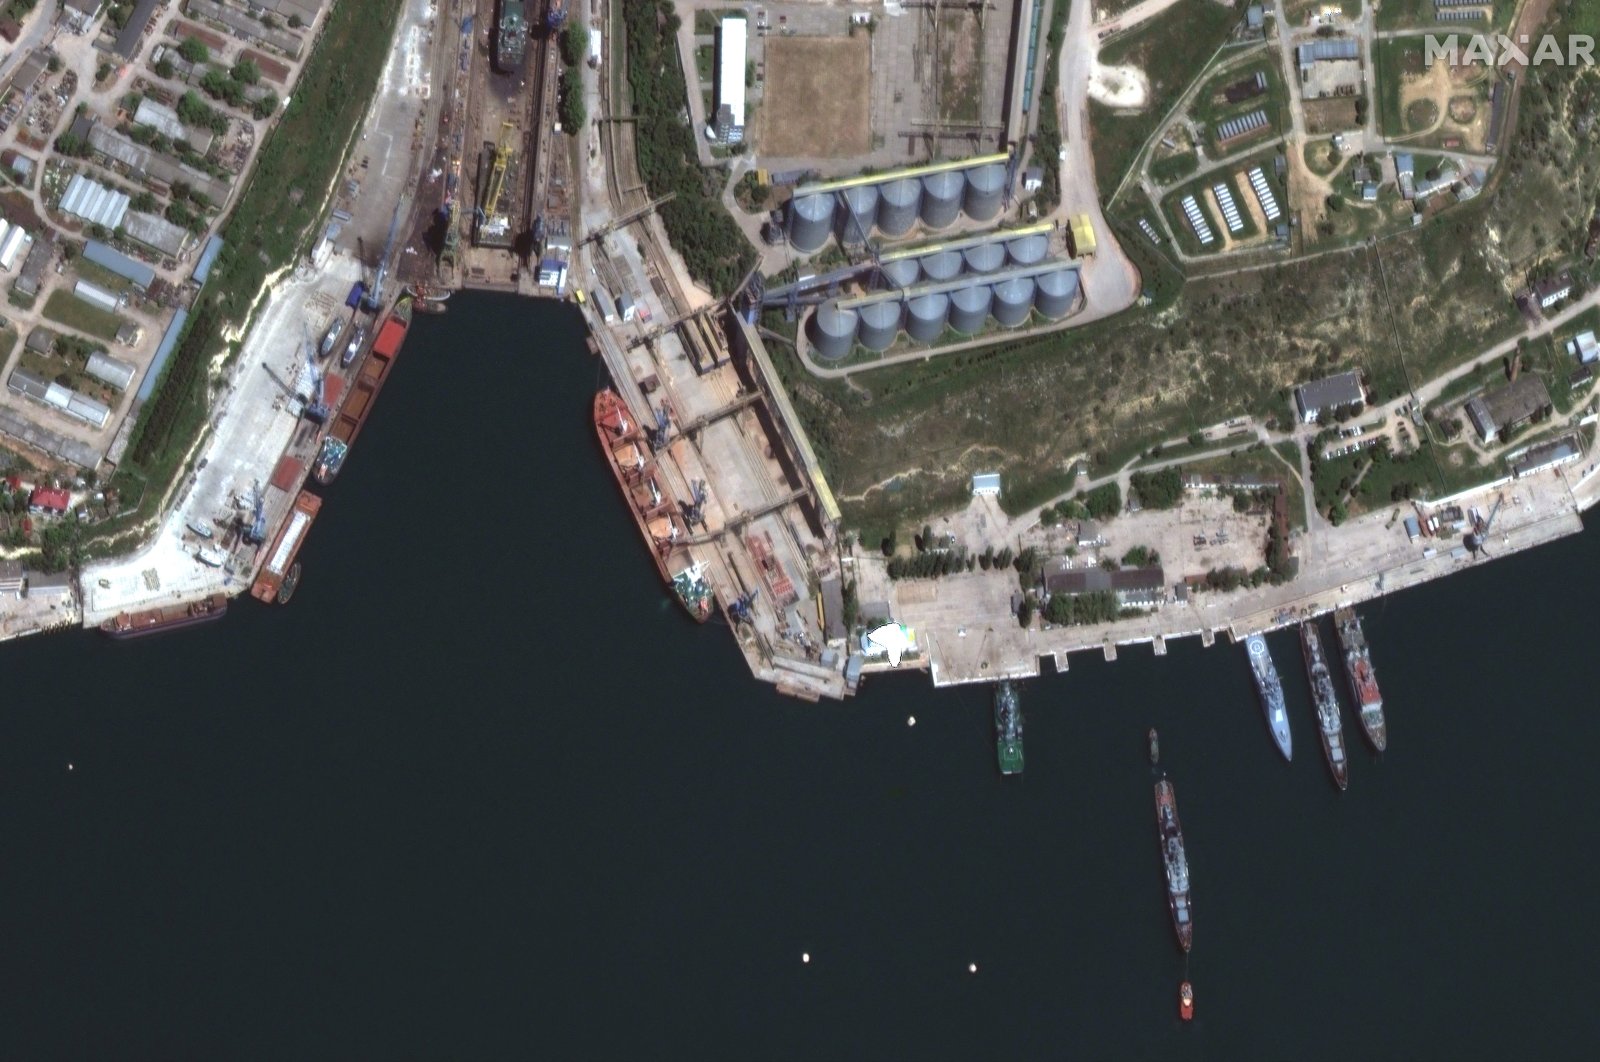 A satellite image shows an overview of a bulk carrier ship loading grain at the Ukrainian Black Sea port of Sevastopol, Ukraine, May 22, 2022. (Reuters Photo)